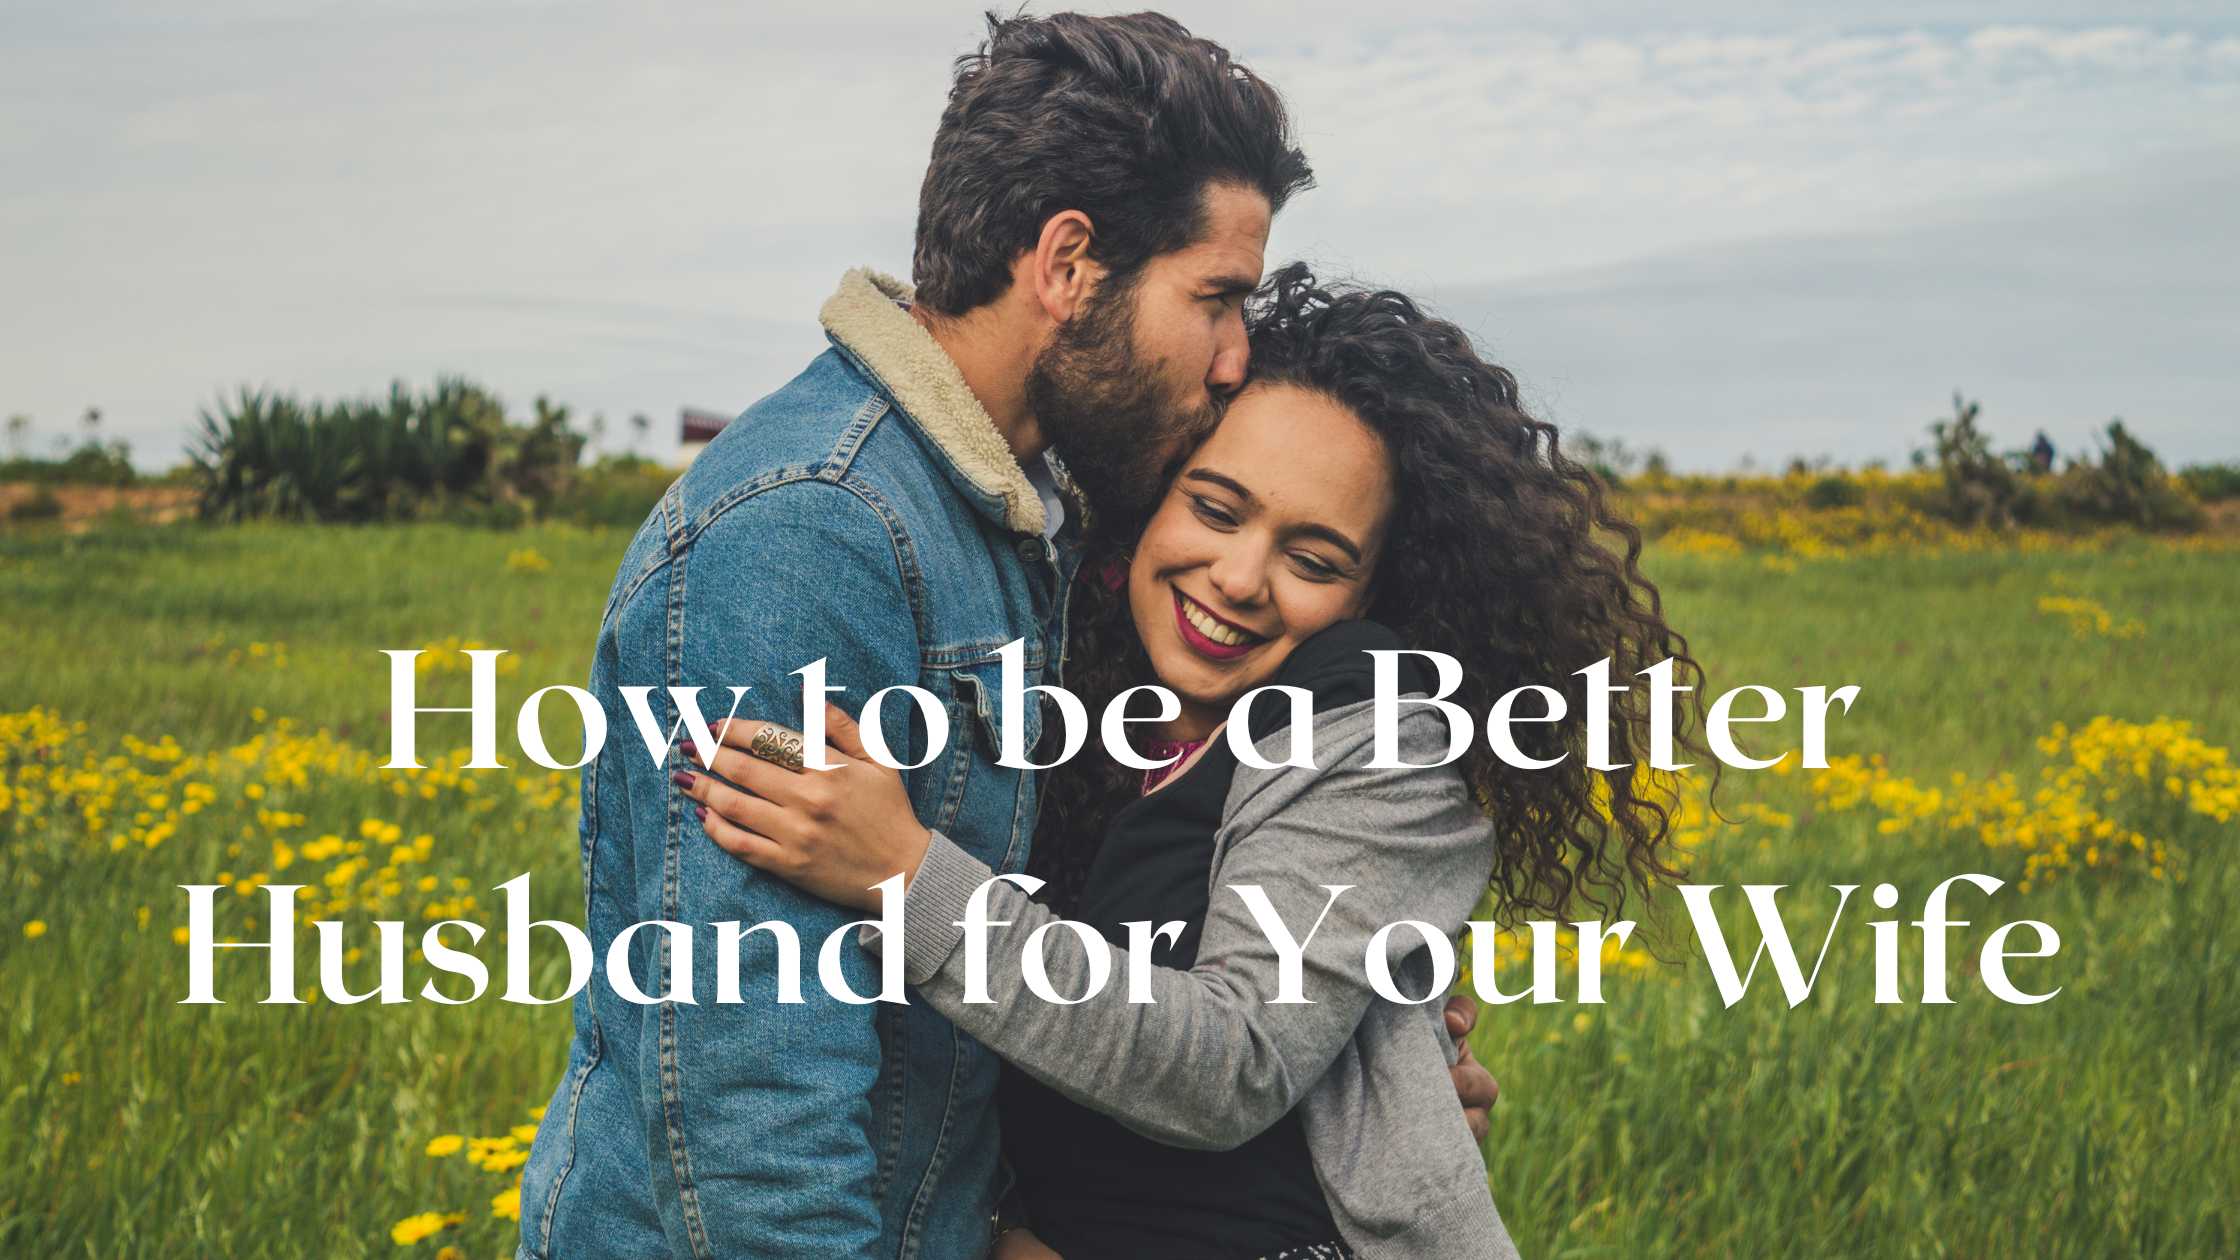 41 Ways to Be a Better Husband 29